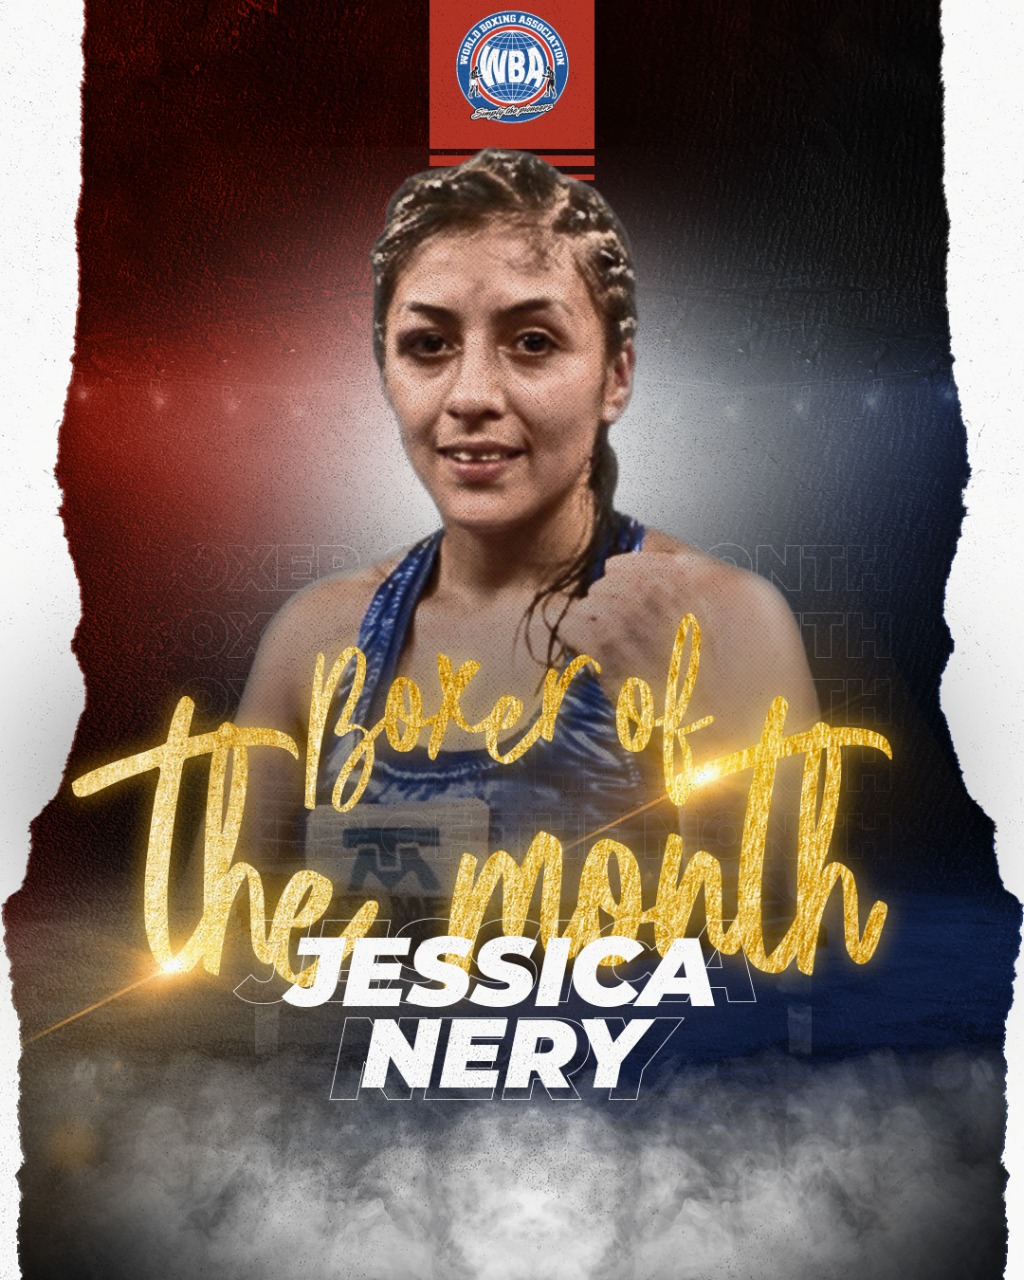 Jessica Nery Plata was the most outstanding fighter of the month by WBA